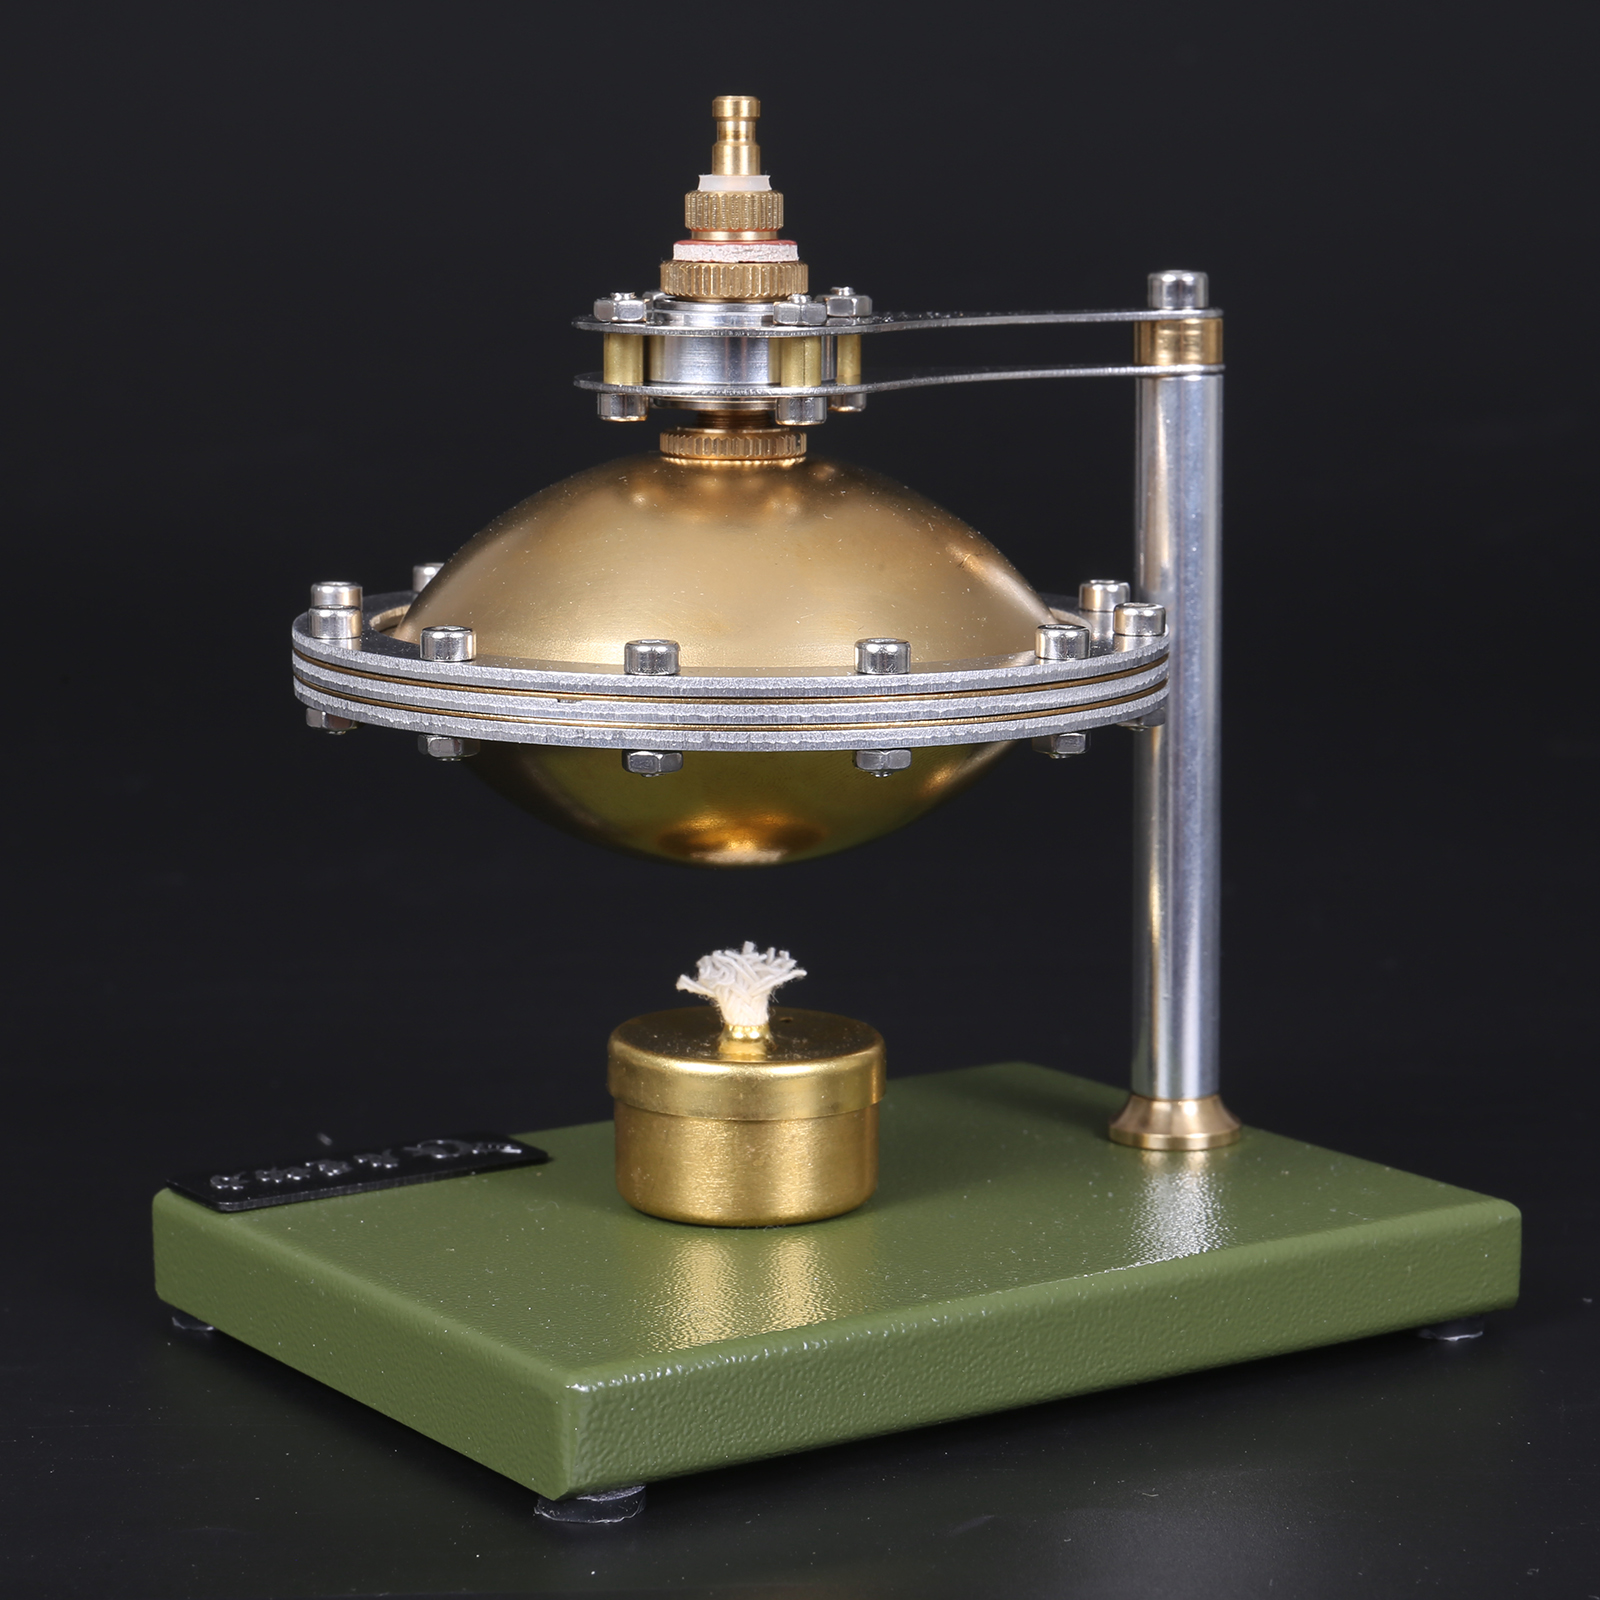 UFO Spin Suspension Hot Air Stirling Engine Motor Steam Heat Electricity Generator Machine Education Model Toy Kits